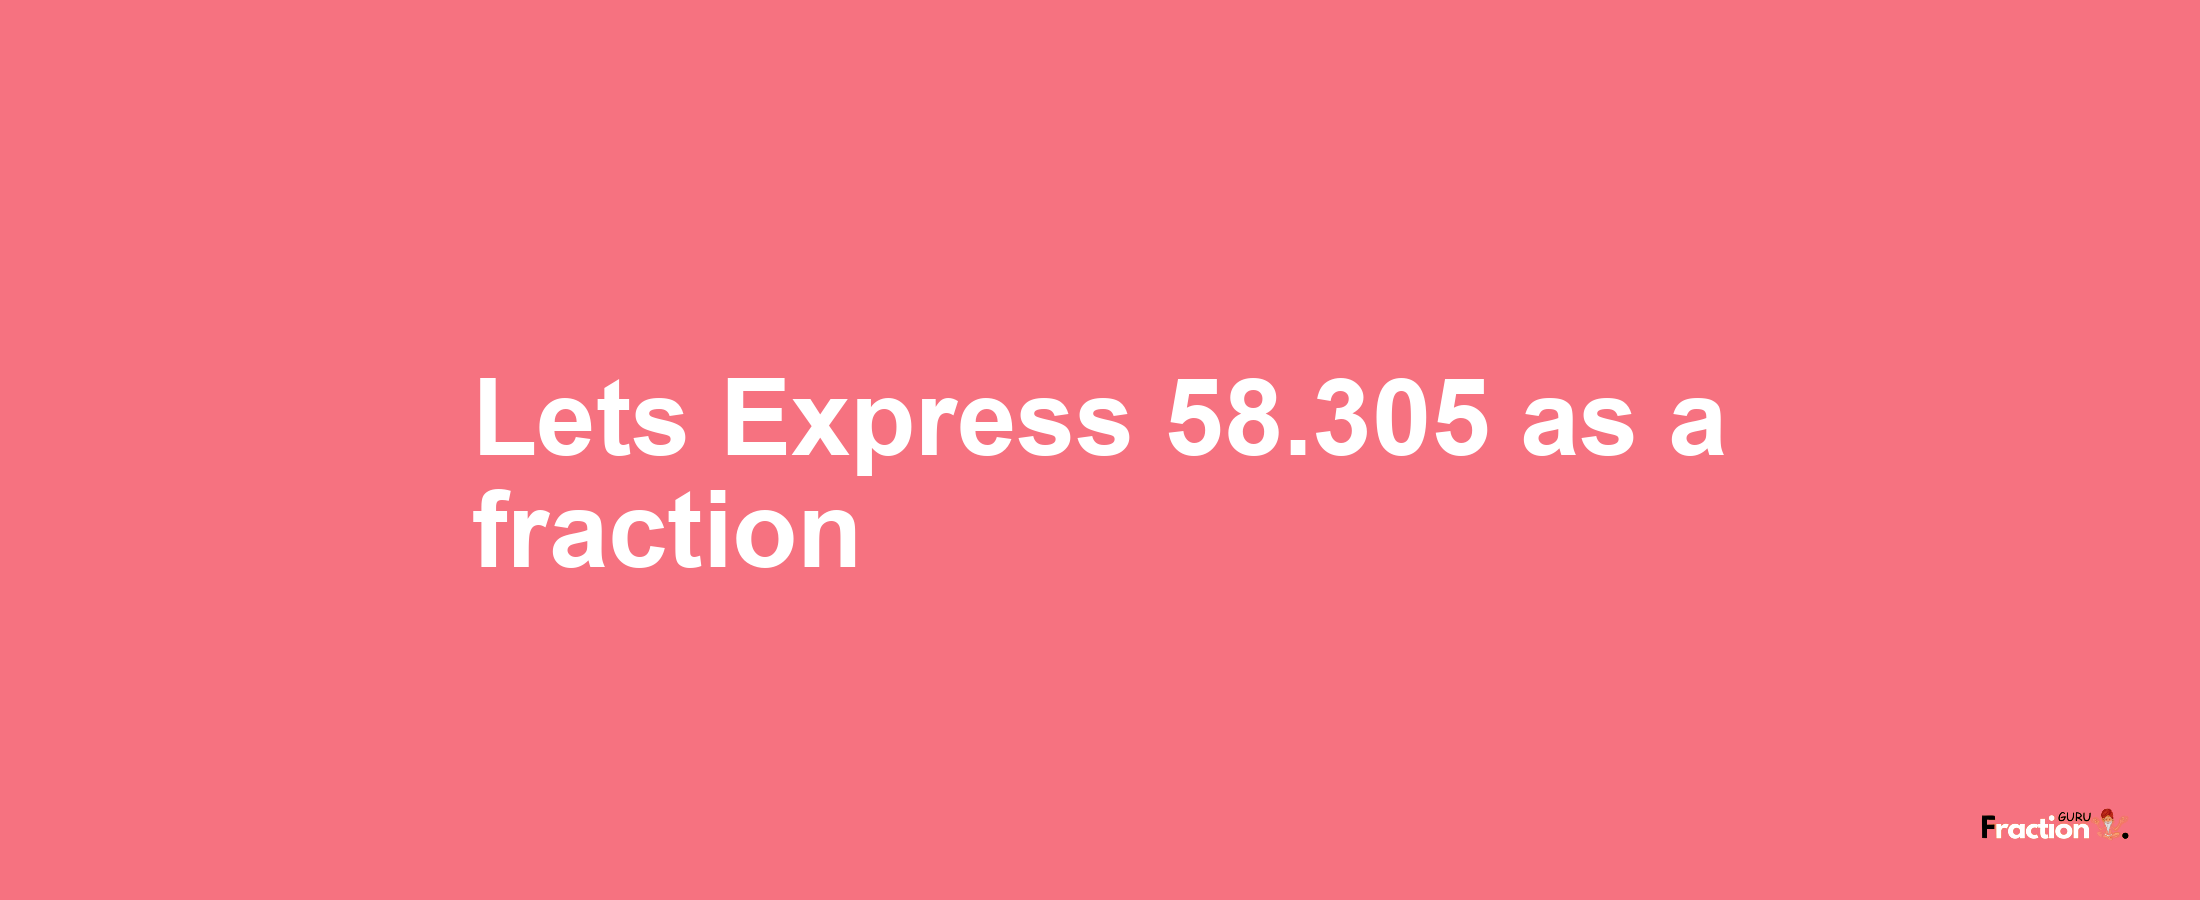 Lets Express 58.305 as afraction